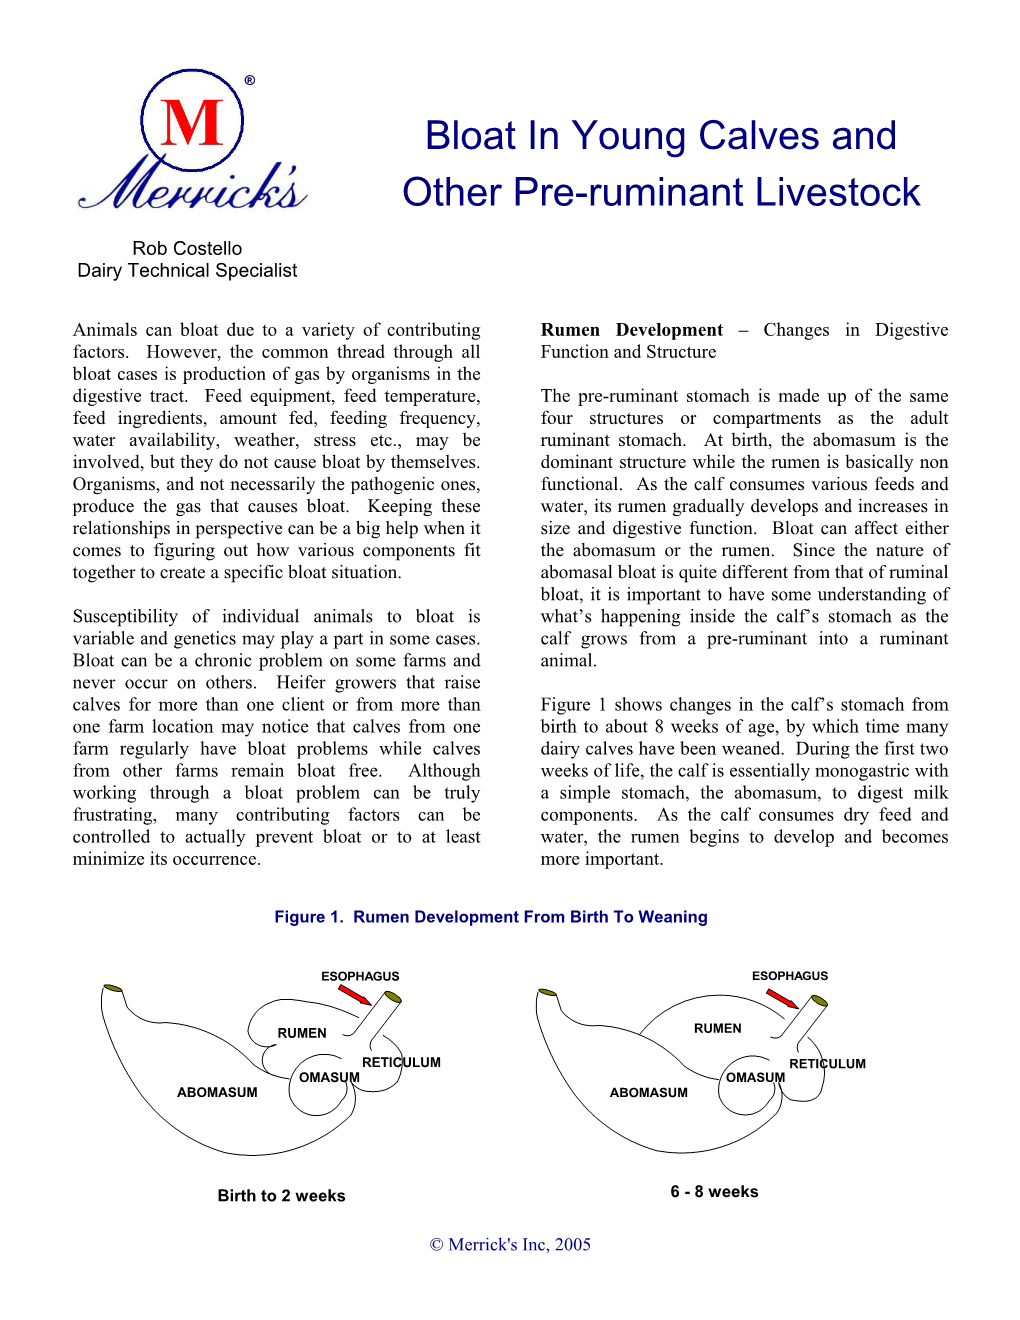 Bloat in Young Calves and Other Pre-Ruminant Livestock